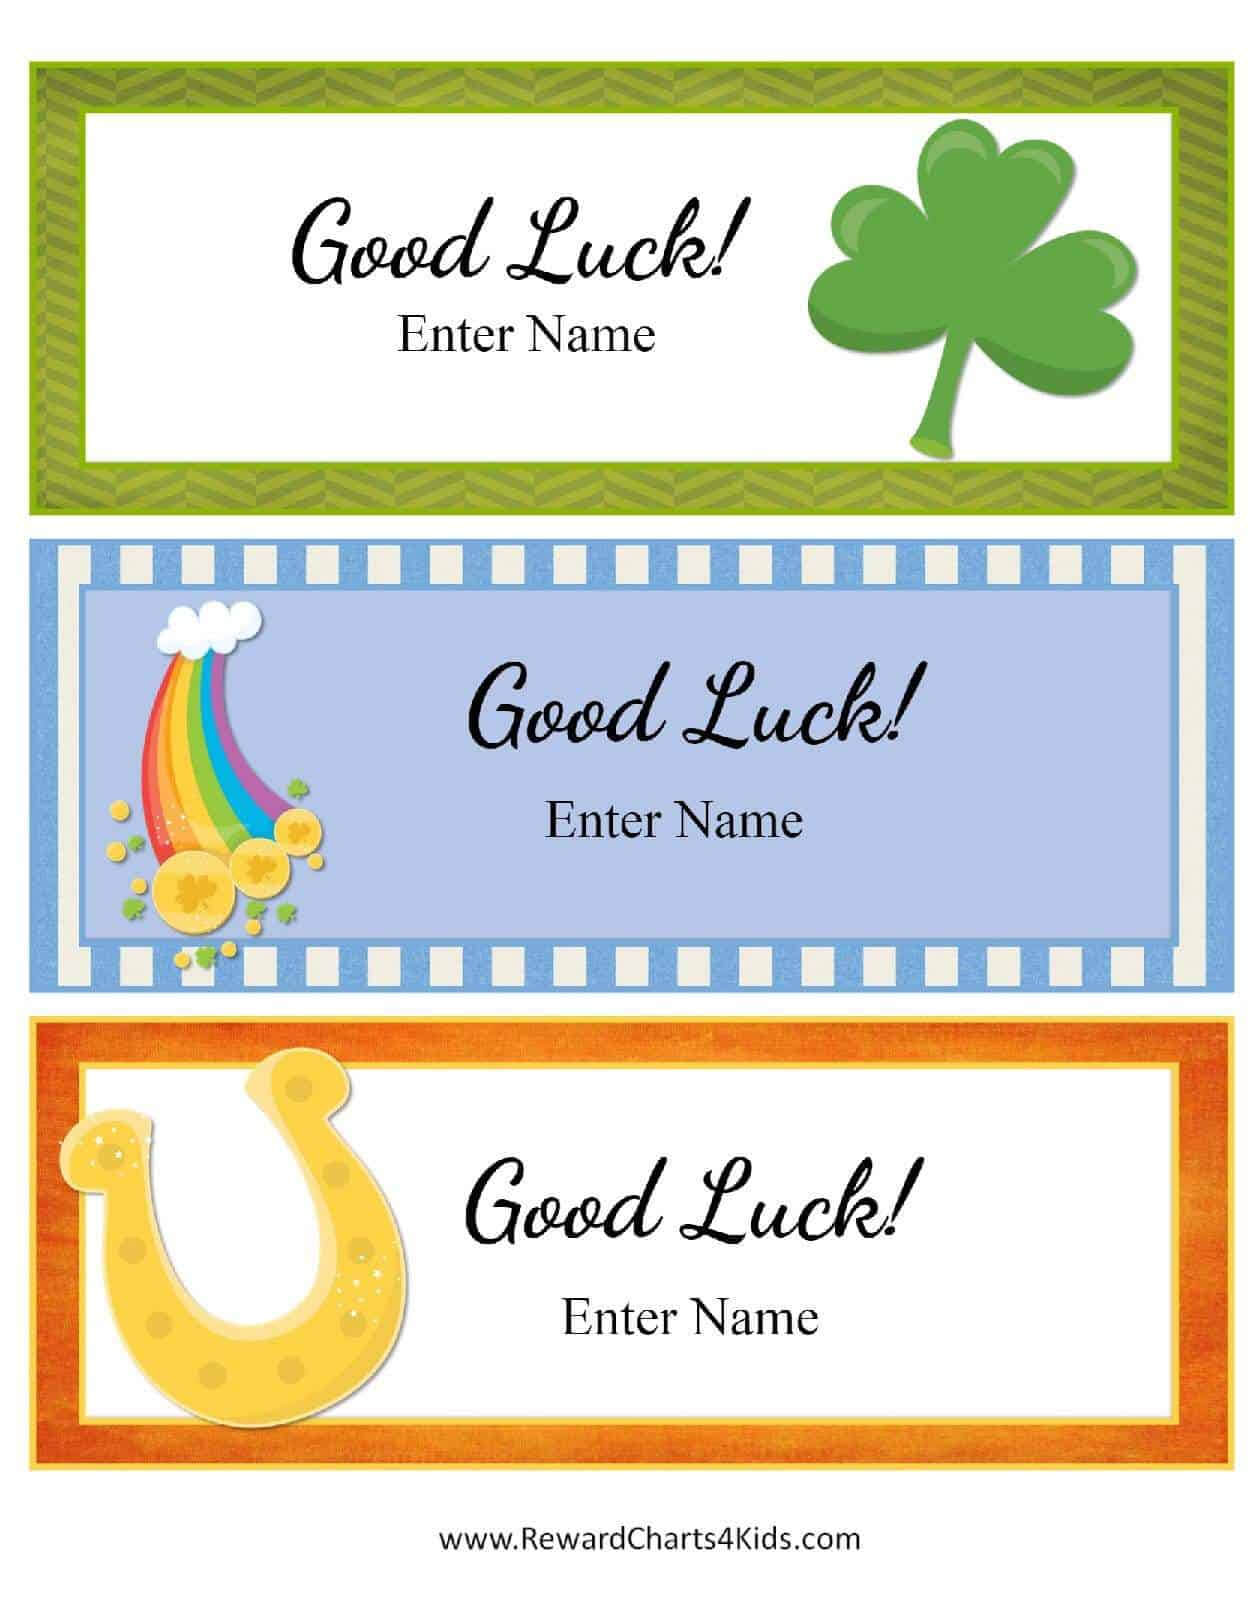 Free Good Luck Cards For Kids | Customize Online & Print At Home Throughout Good Luck Card Templates